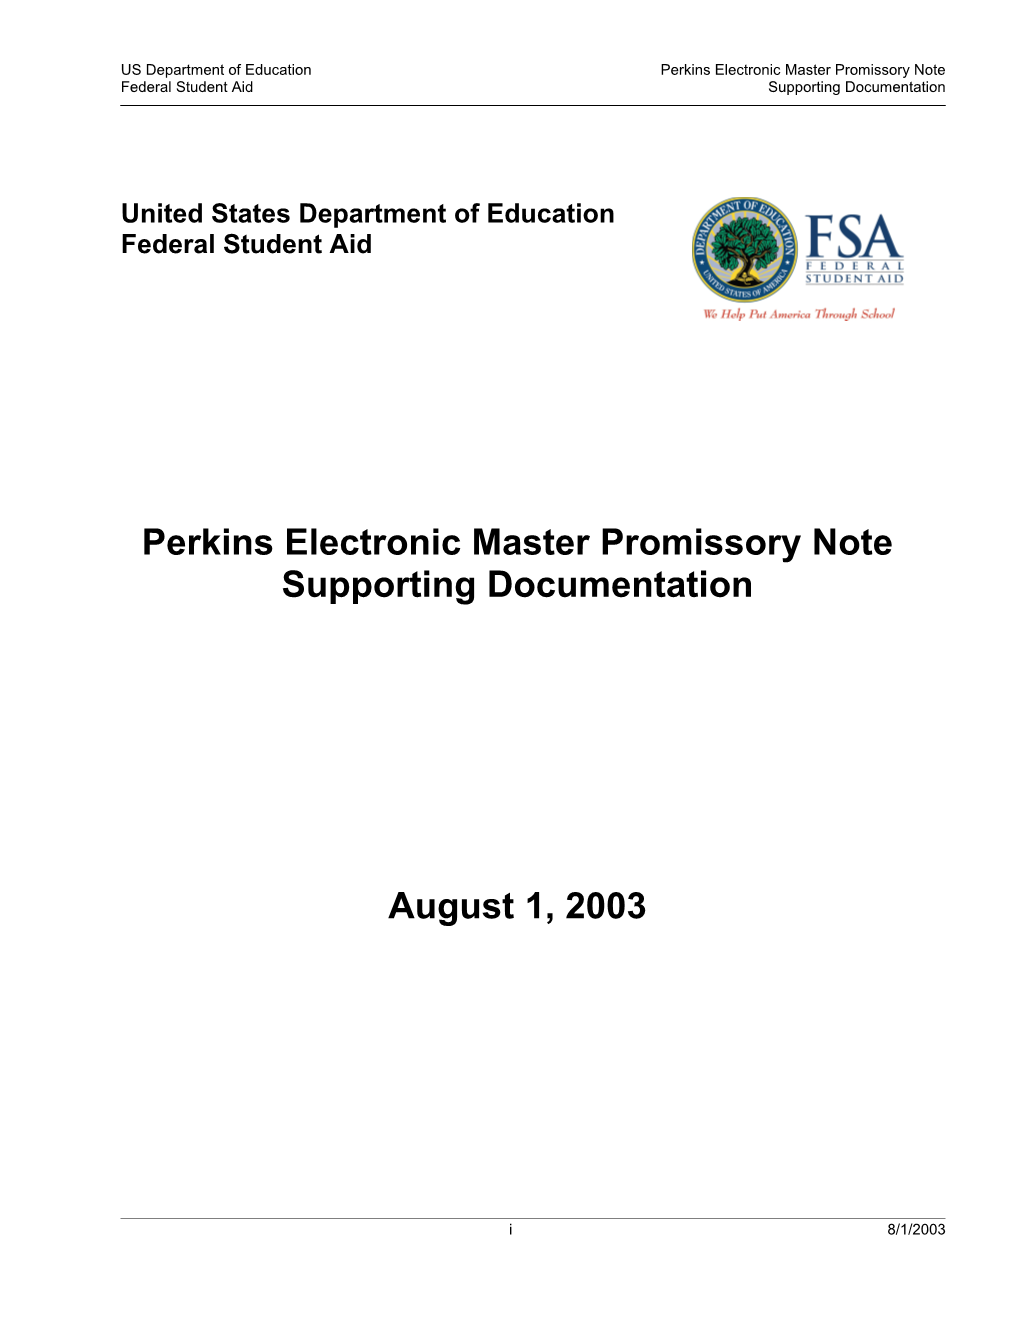 Perkins Electronic Master Promissory Note Supporting Documentation